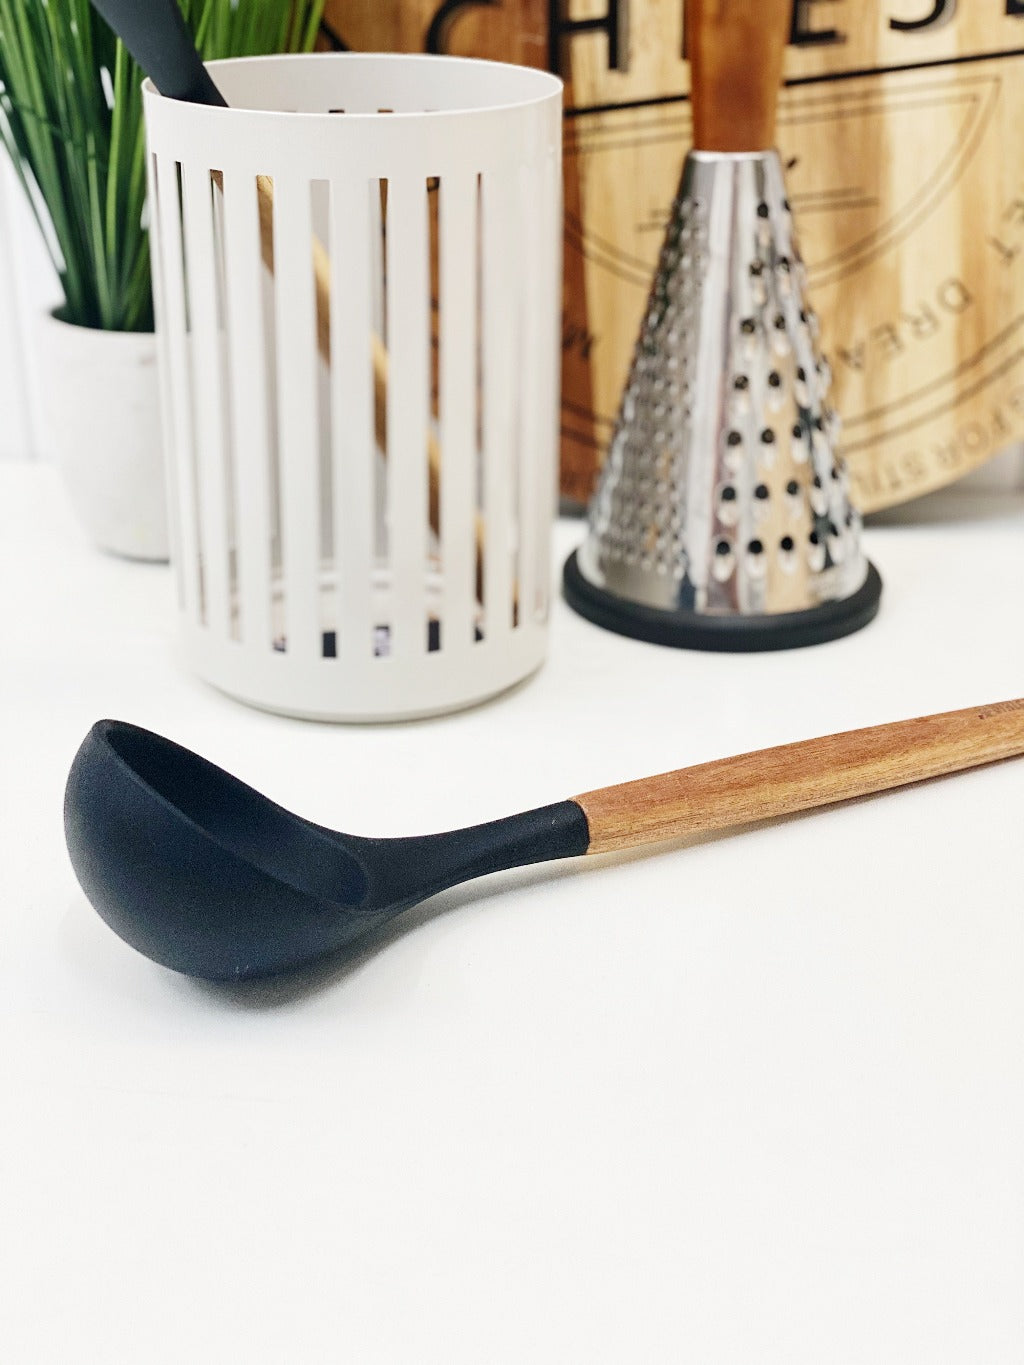 Bialetti St Clare Acacia Handle Silicone Ladle - Kitchen Utensils - black silicone head - heat resistant up to 500degrees - solid acacia handle |Bliss Gifts &amp; Homewares - Unit 8, 259 Princes Hwy Ulladulla - Shop Online &amp; In store - 0427795959, 44541523 - Australia wide shipping